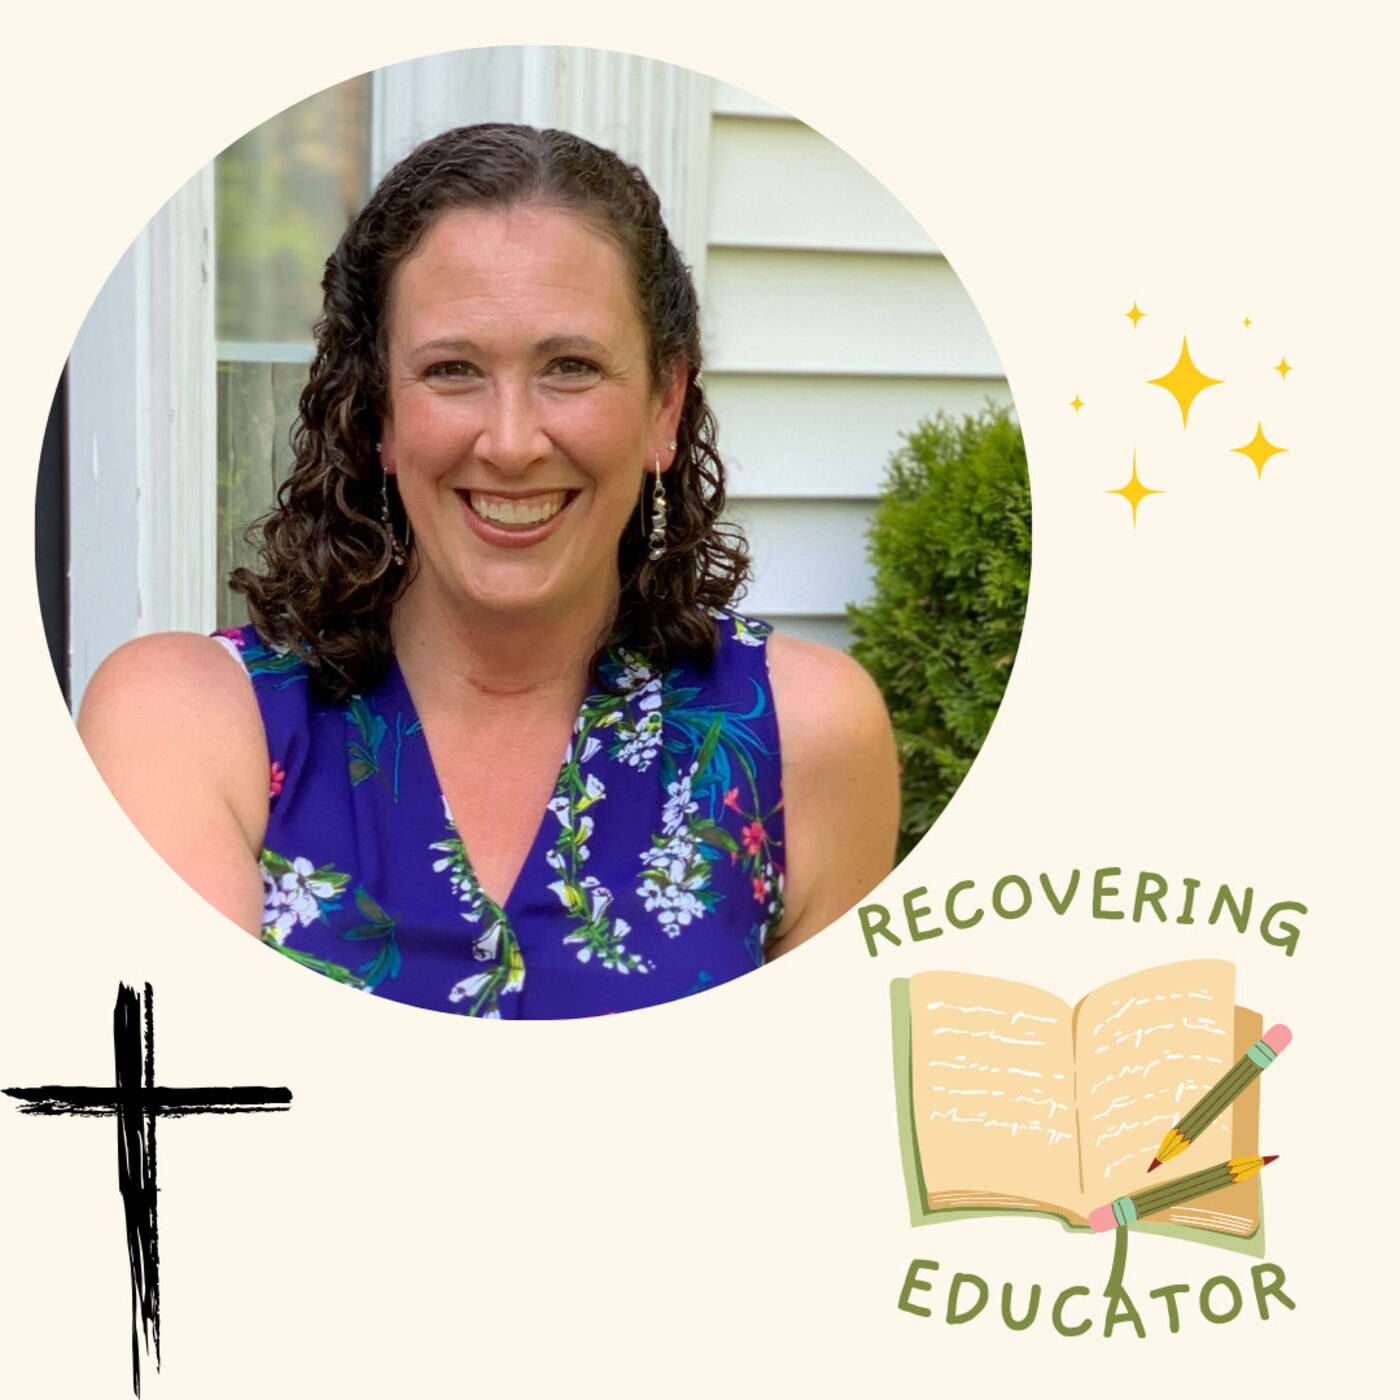 Dr. Naomi Hall “The Recovering Educator” on Faith, Balance, and Beating Burnout (P2)